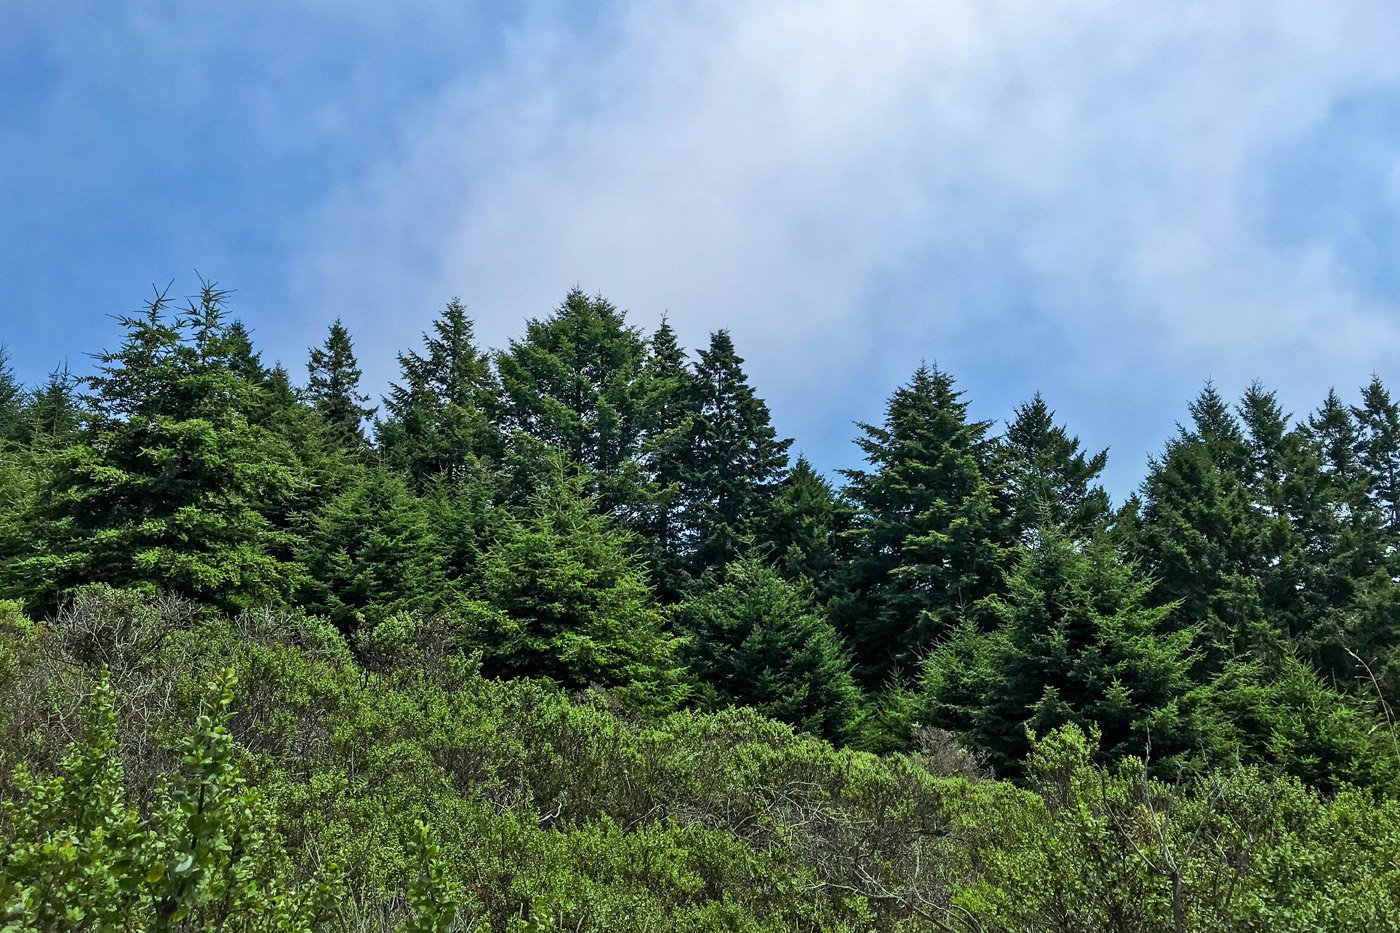 A landscape image showing the tips of redwood trees standing against a partially cloudy blue sky, peaking above a hillside filled with huckleberry and other brushy undergrowth.